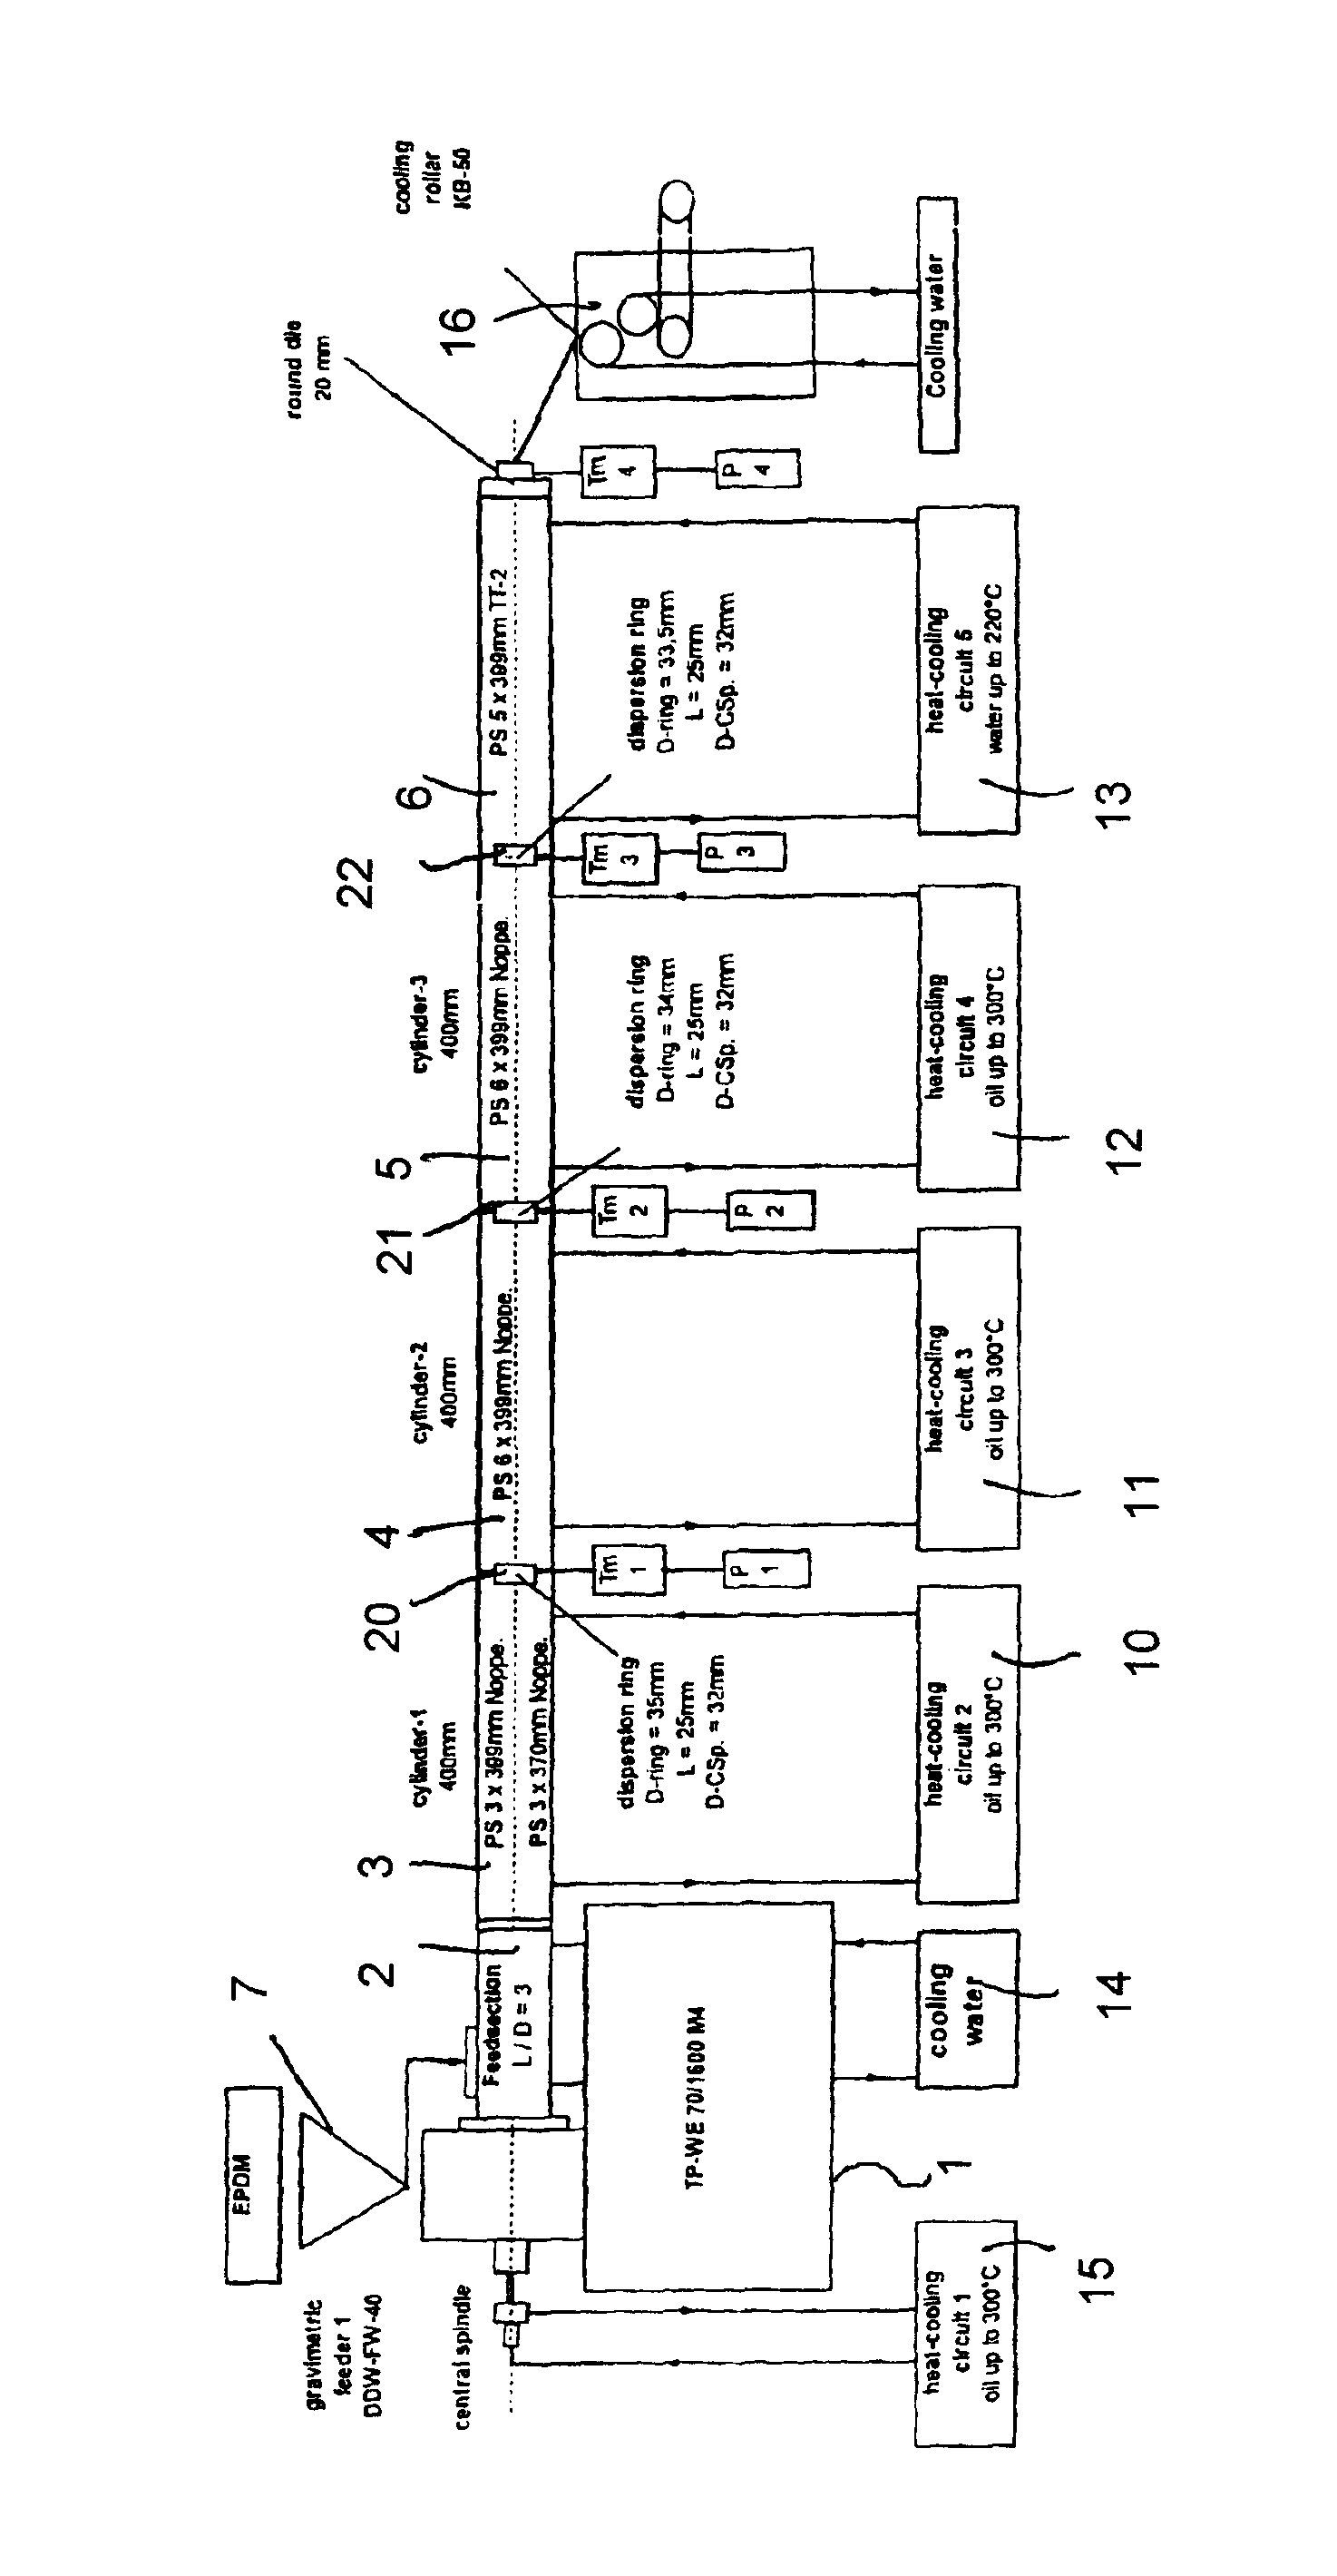 Non-chemical, mechanical procedure for the devulcanization of scrap rubber and/or elastomers and apparatus therefor